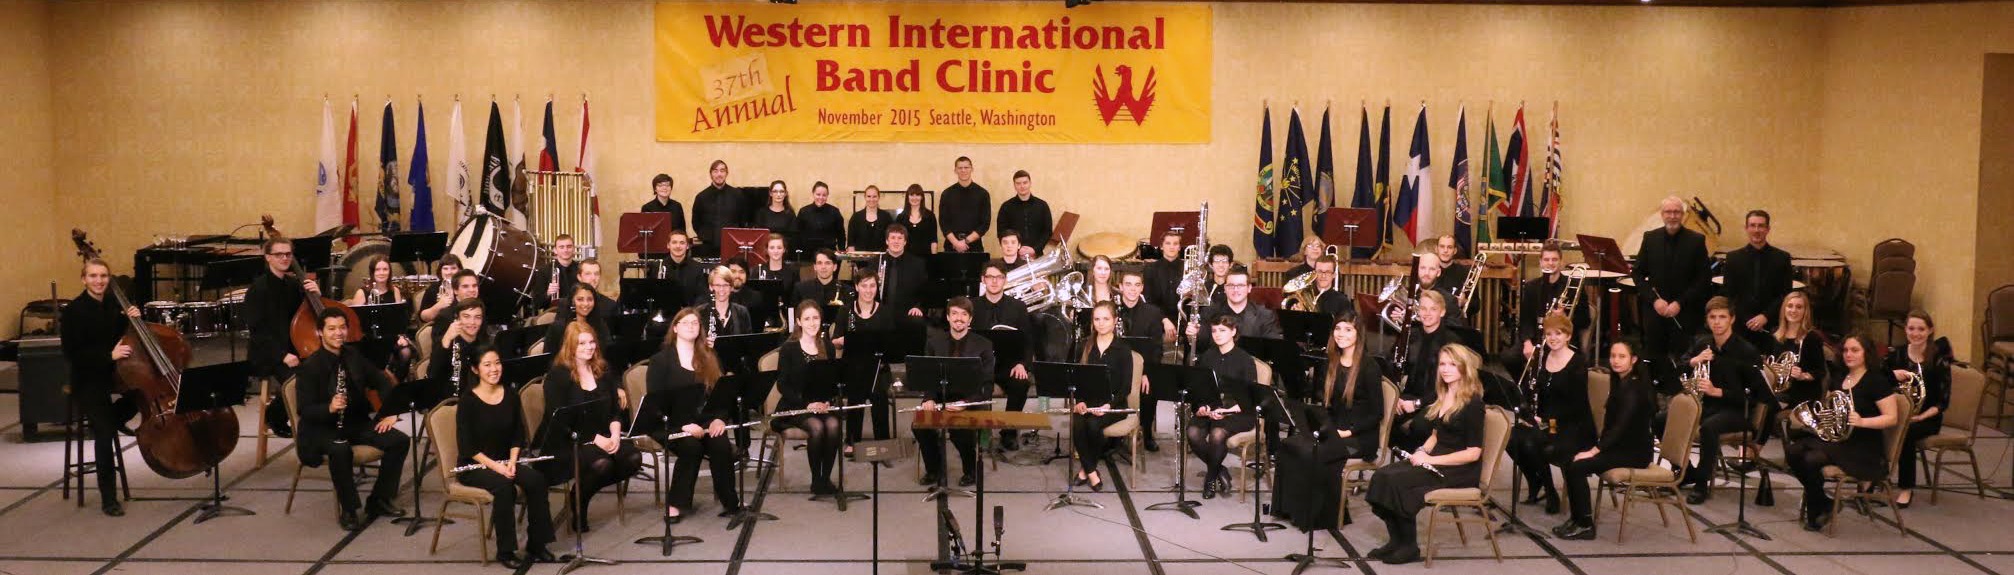 Lutes played to more than 800 students, band directors and music lovers who packed the house at the Western International Band Clinic on Saturday, November 21, 2015.